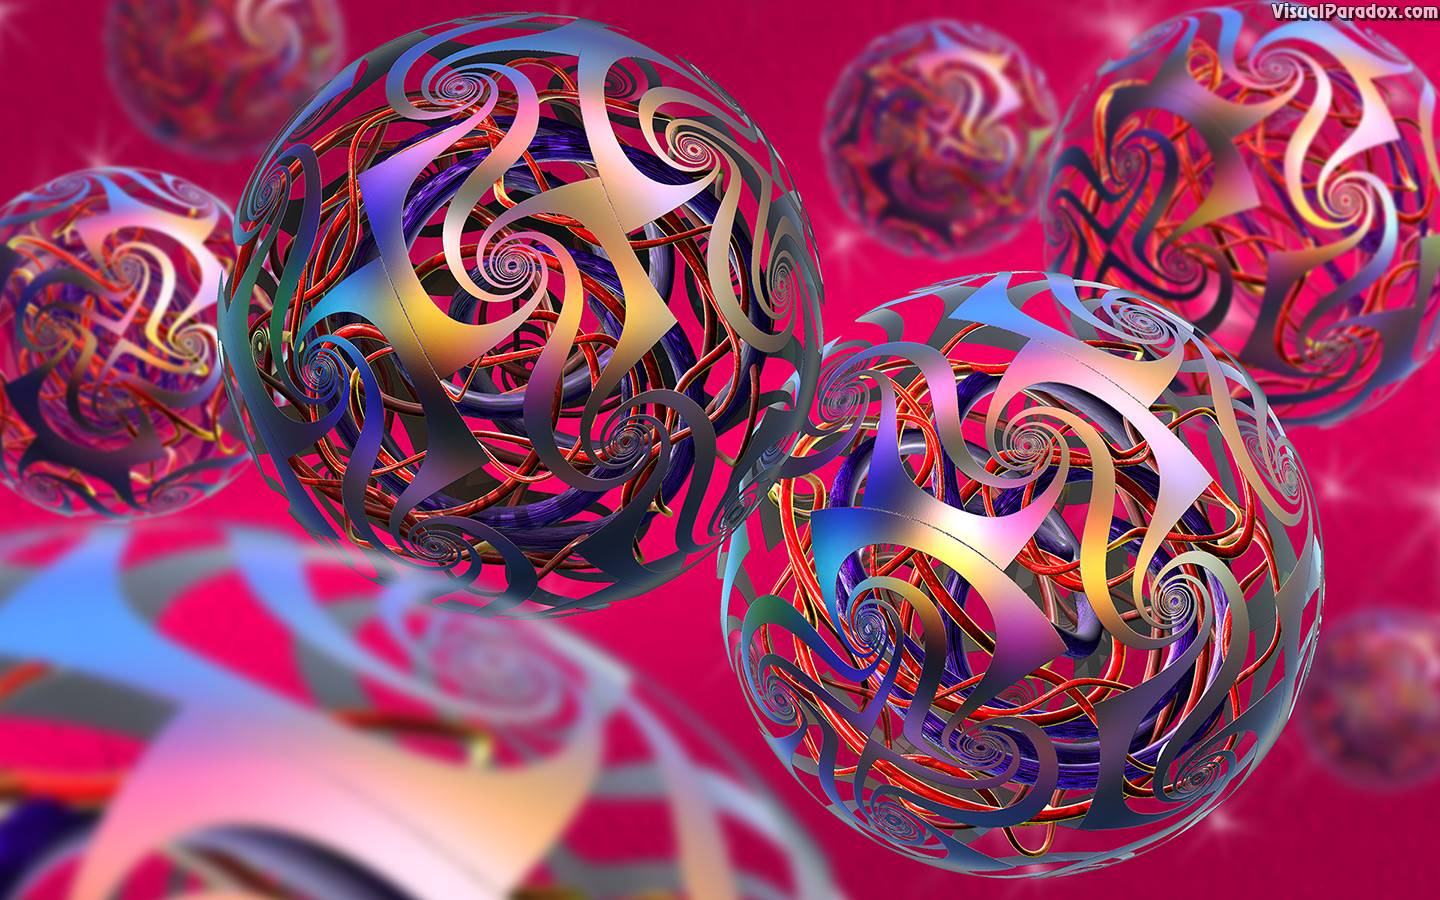 abstract, art, background, backgrounds, ball, beautiful, christmas, curled, curve, design, element, fractal, future, gold, graphic, helix, illustration, intricacy, lace, light, magic, mathematics, mystic, oracle, ornament, ornate, pattern, psychic, rainbow, round, scroll, shape, sphere, spiral, style, swirl, symbol, twist, twisted, vector, 3d, wallpaper